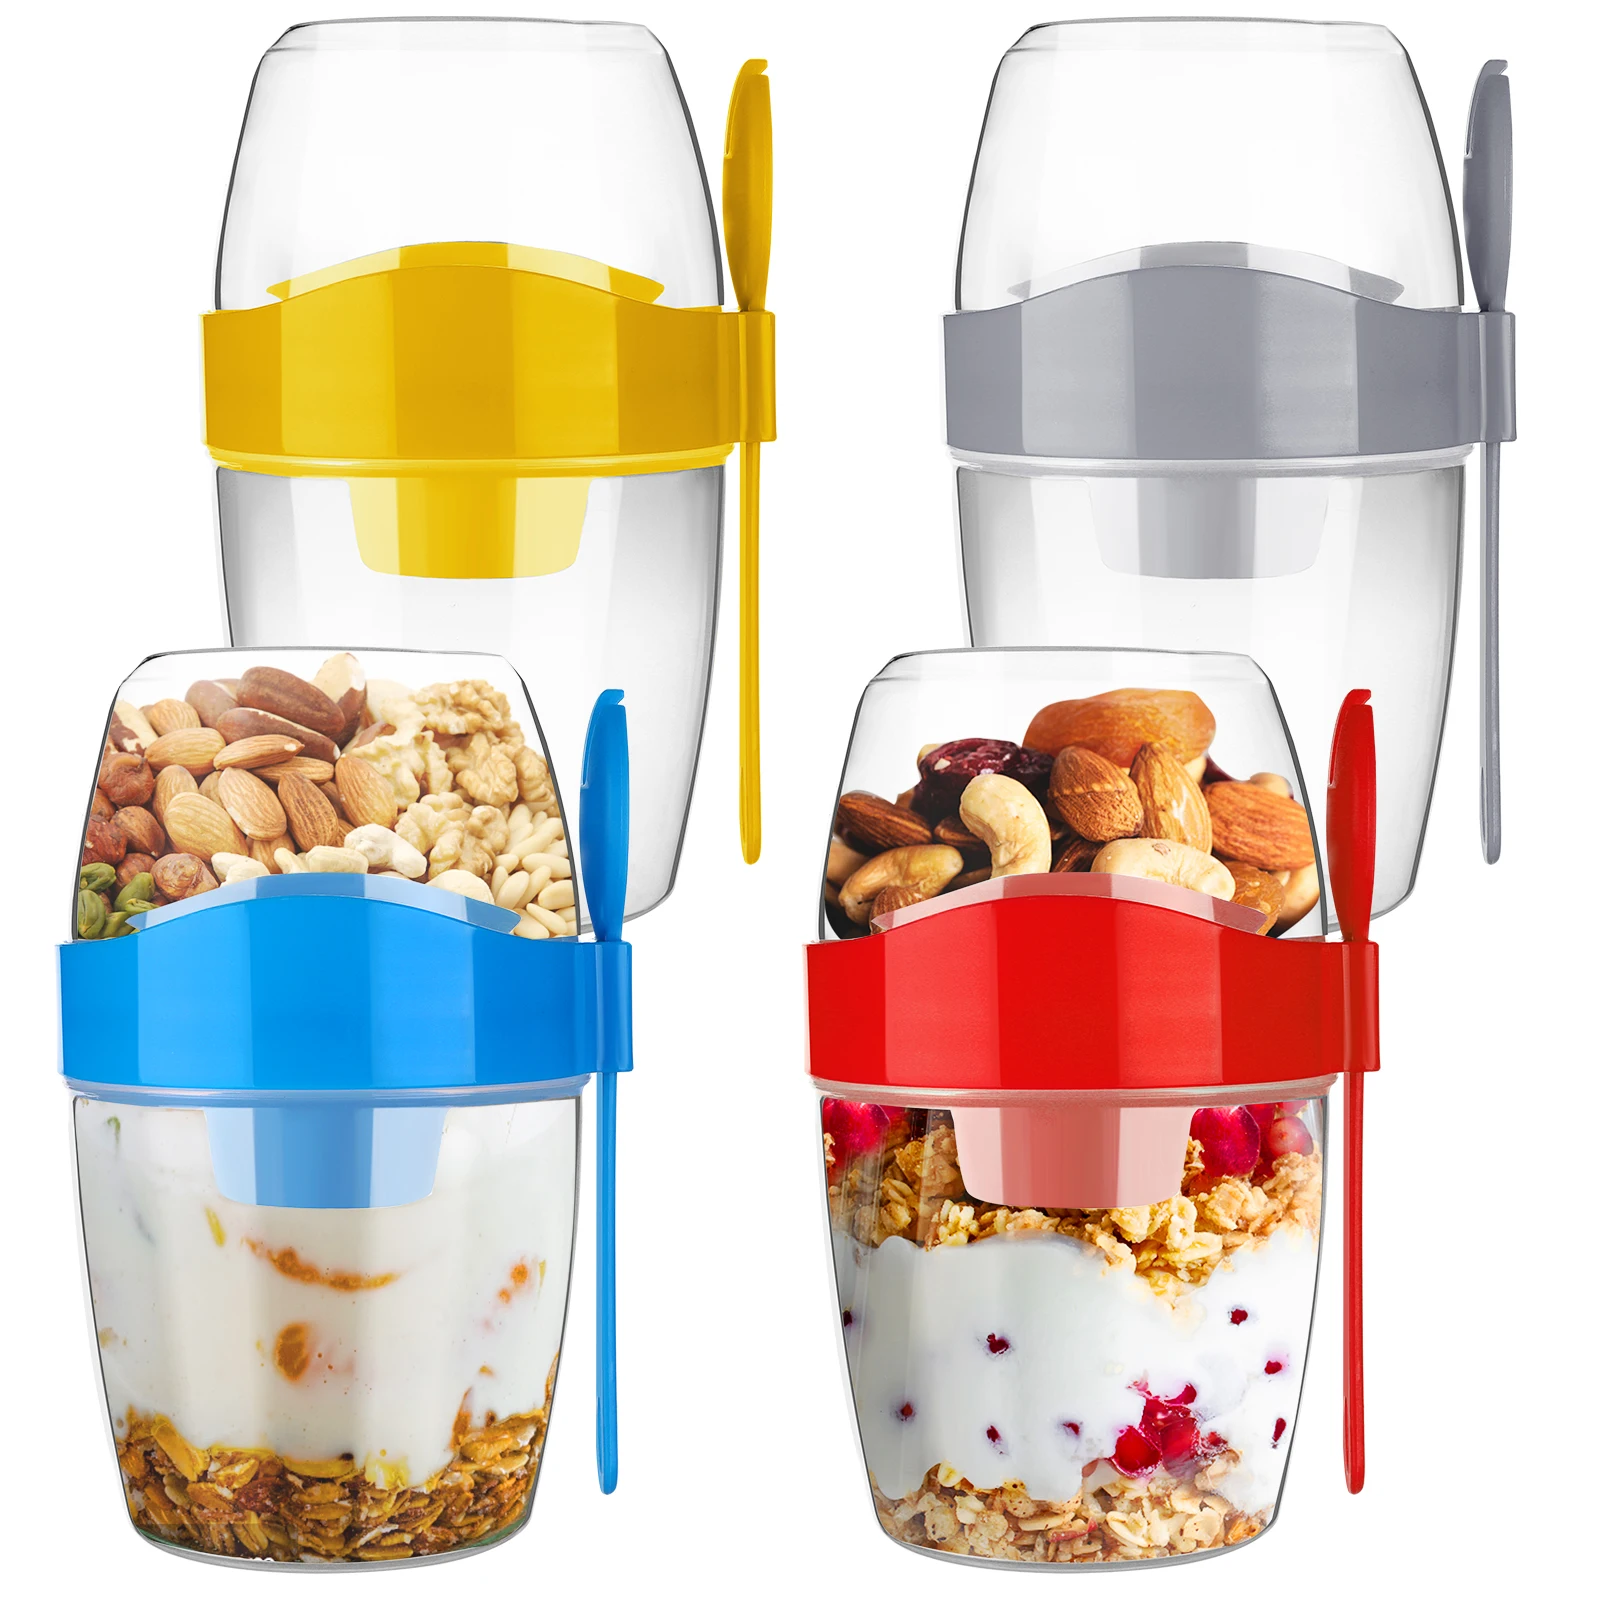 https://ae01.alicdn.com/kf/S8dec9ace87a849bdb921e5e023f52b095/4Pcs-870ml-Overnight-Oats-Container-With-Fork-2-Tier-Breakfast-On-The-Go-Cereal-Yogurt-Cups.jpg